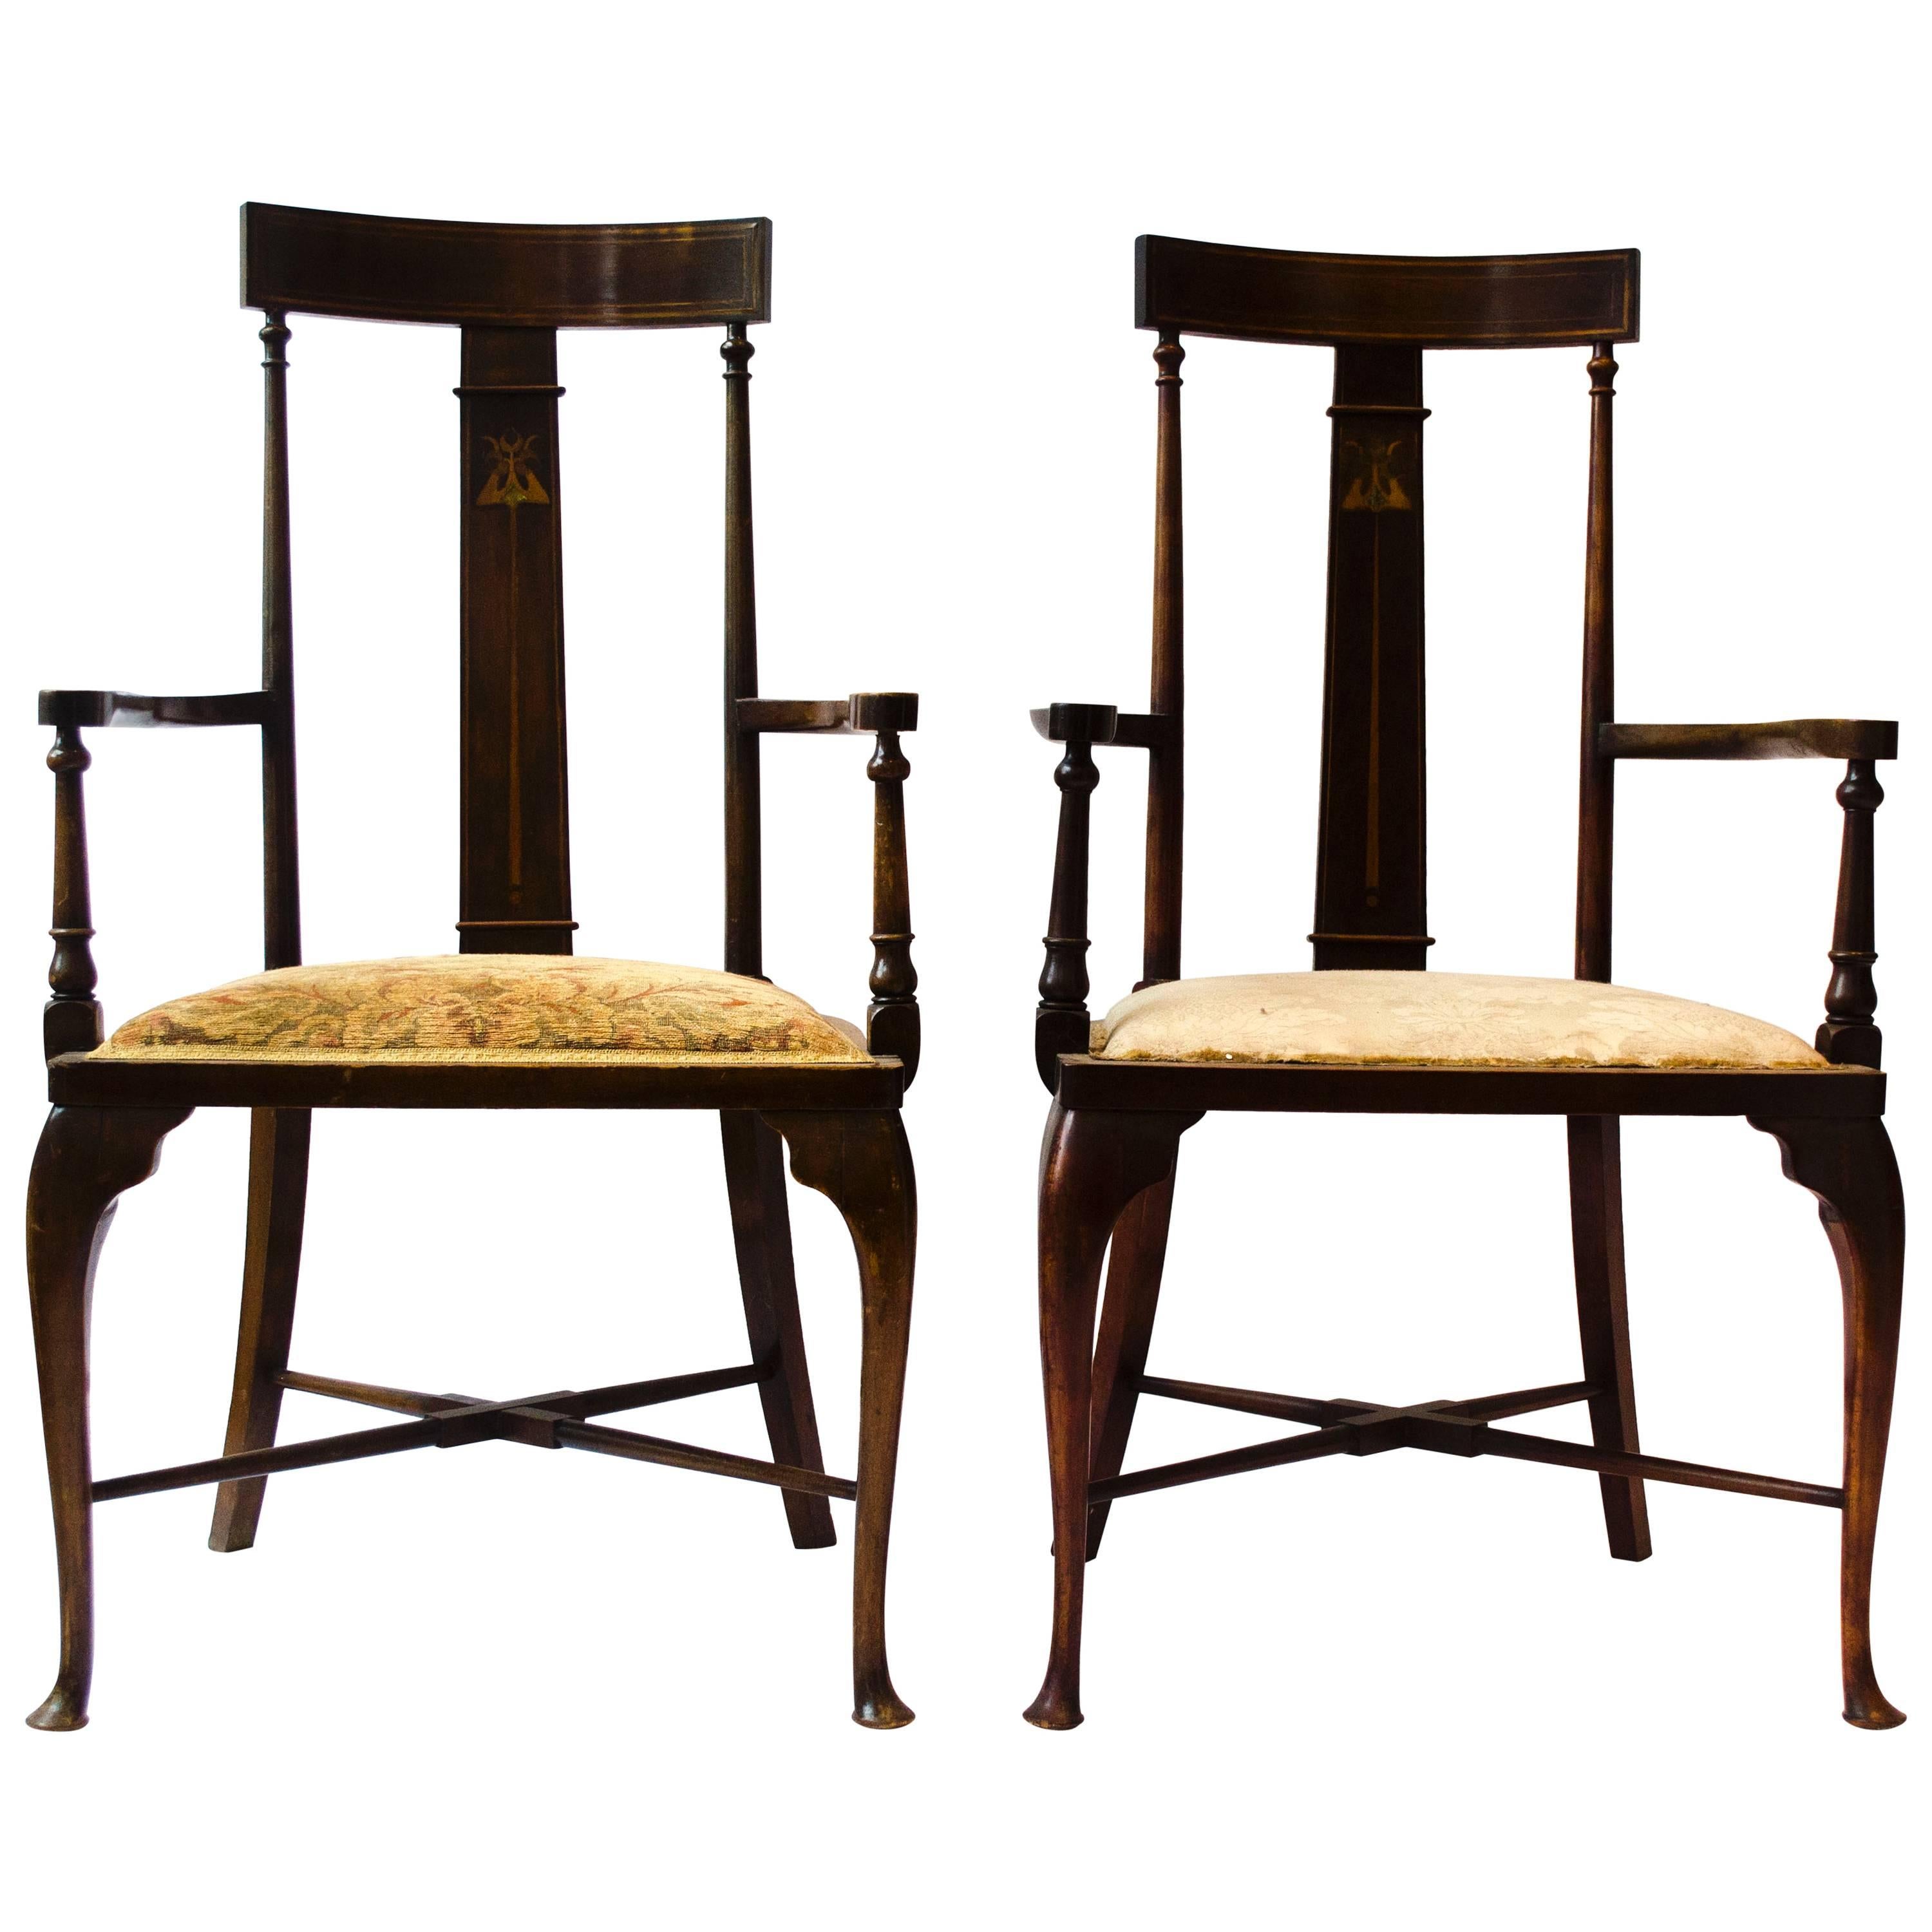 Two Arts & Crafts Armchairs inlaid with Abalone, Walnut, Boxwood & Sycamore